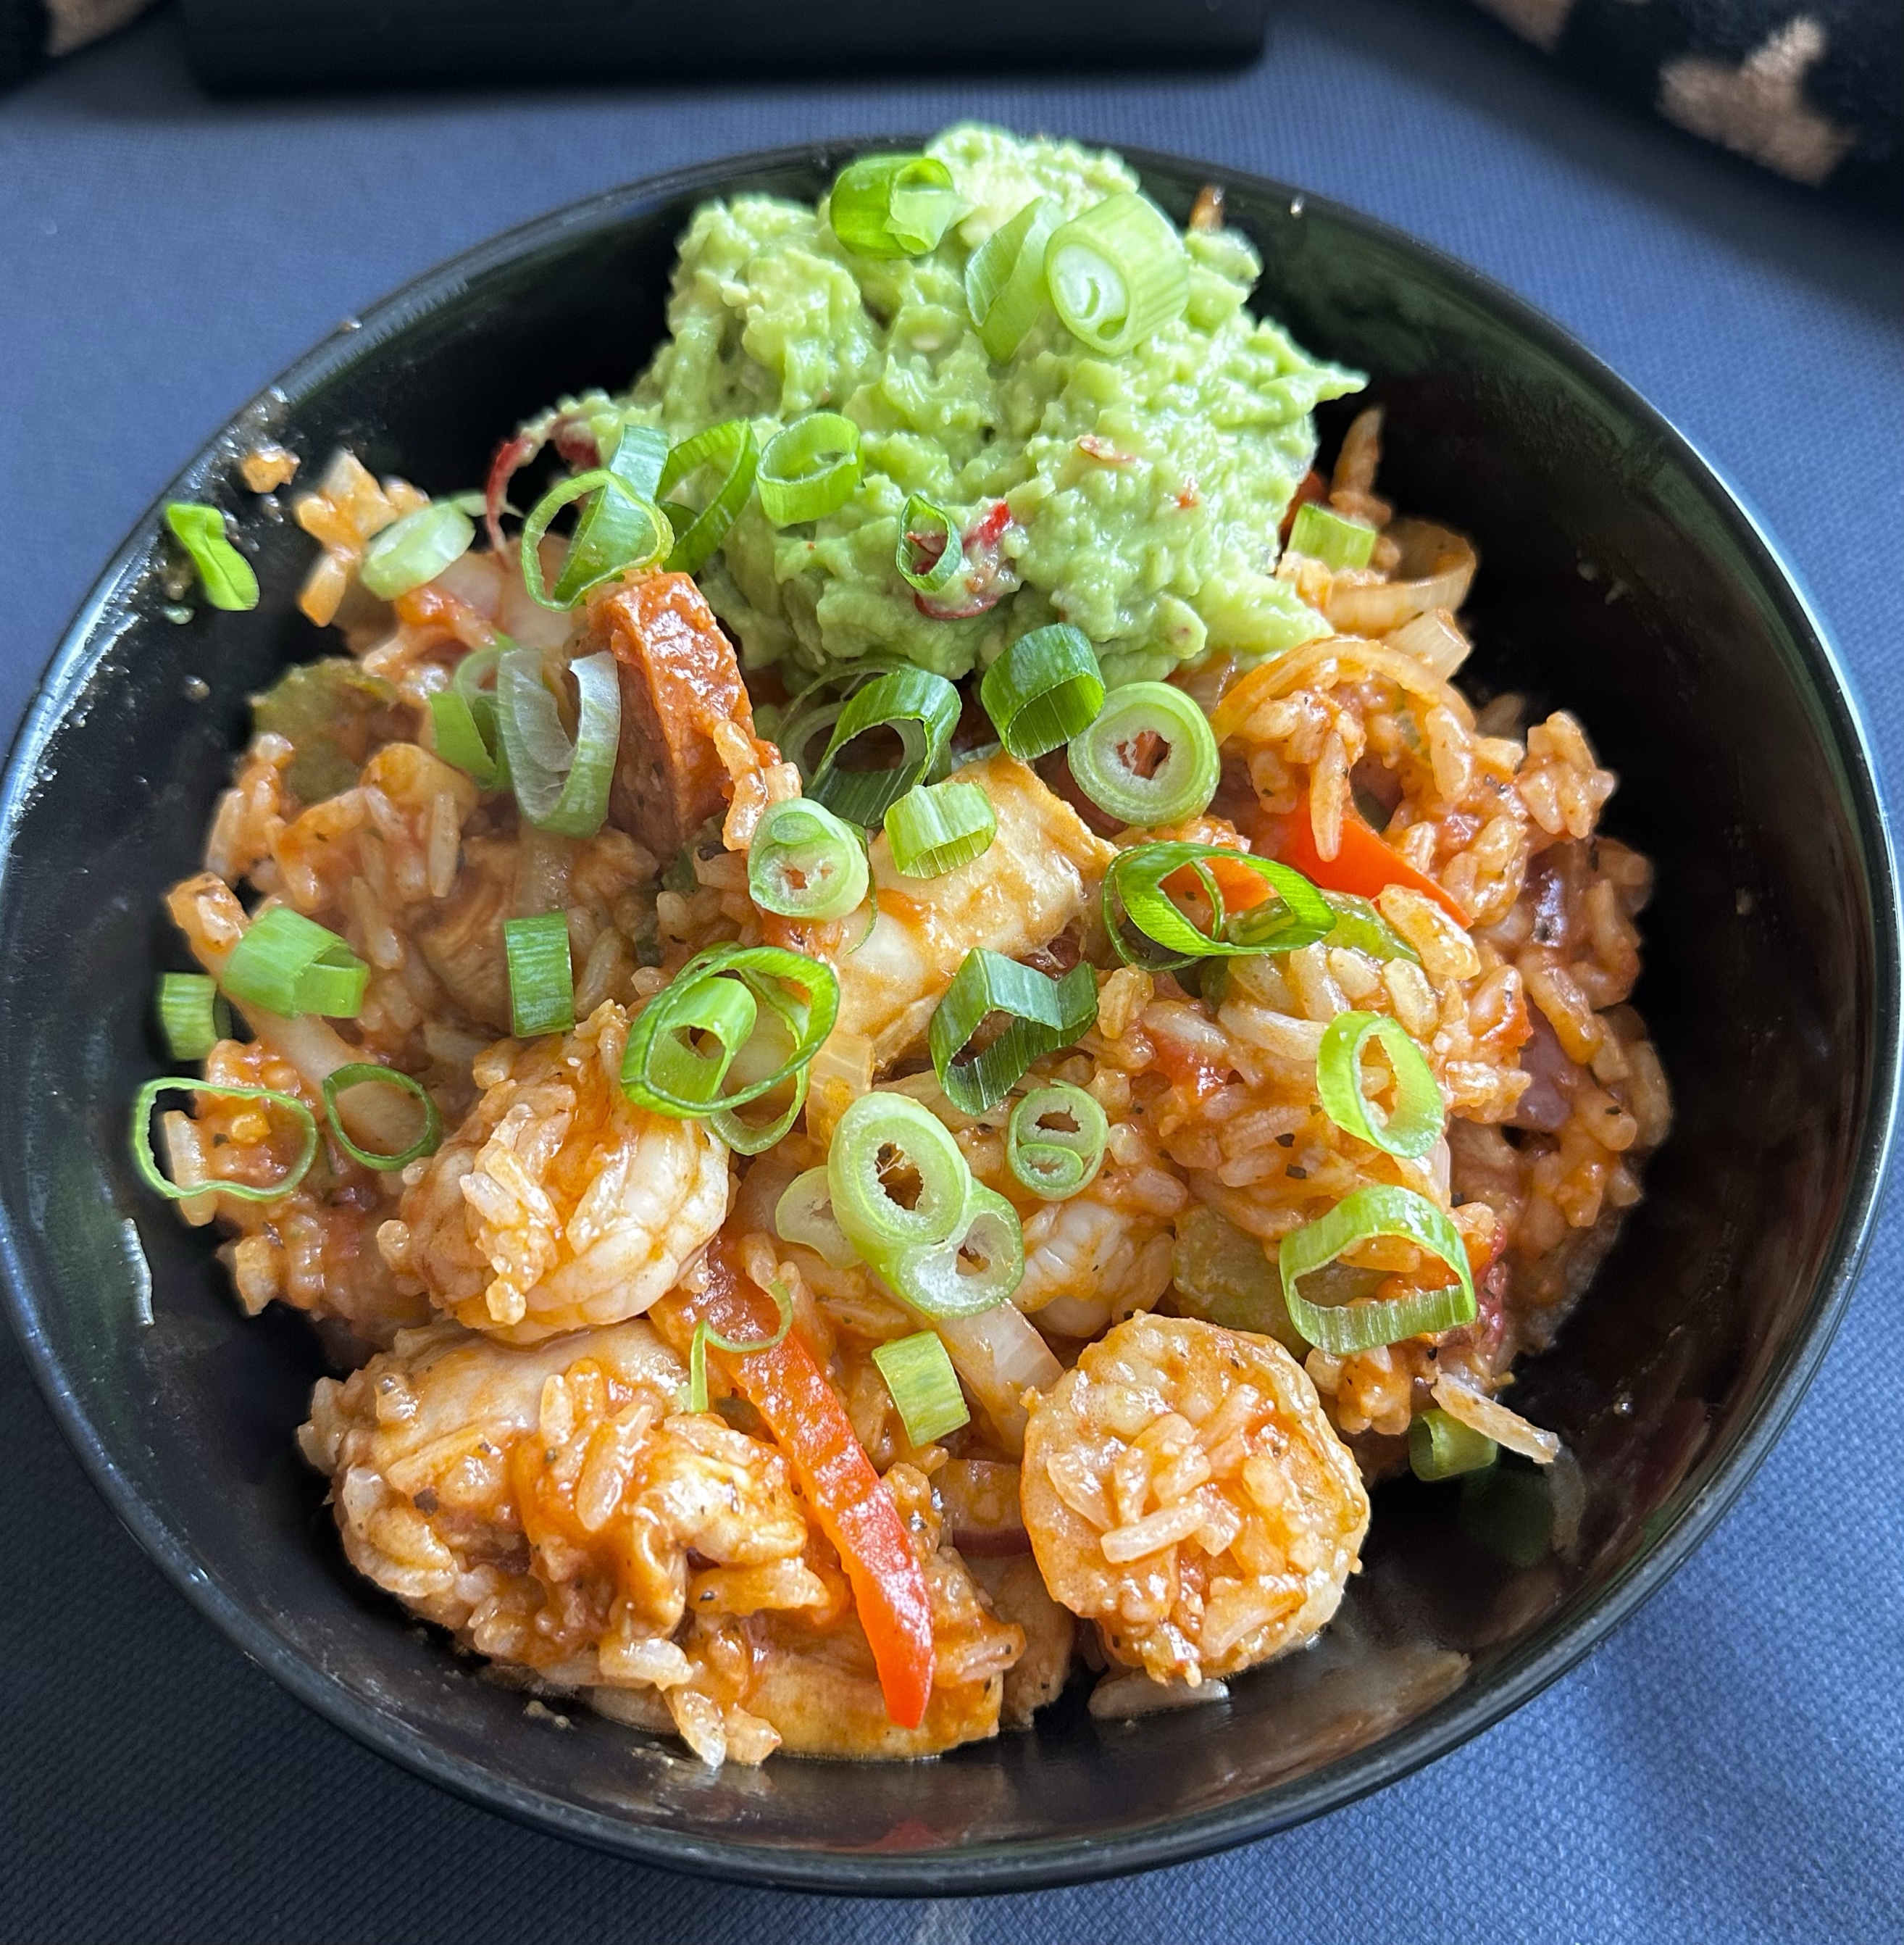 Mexican style rice